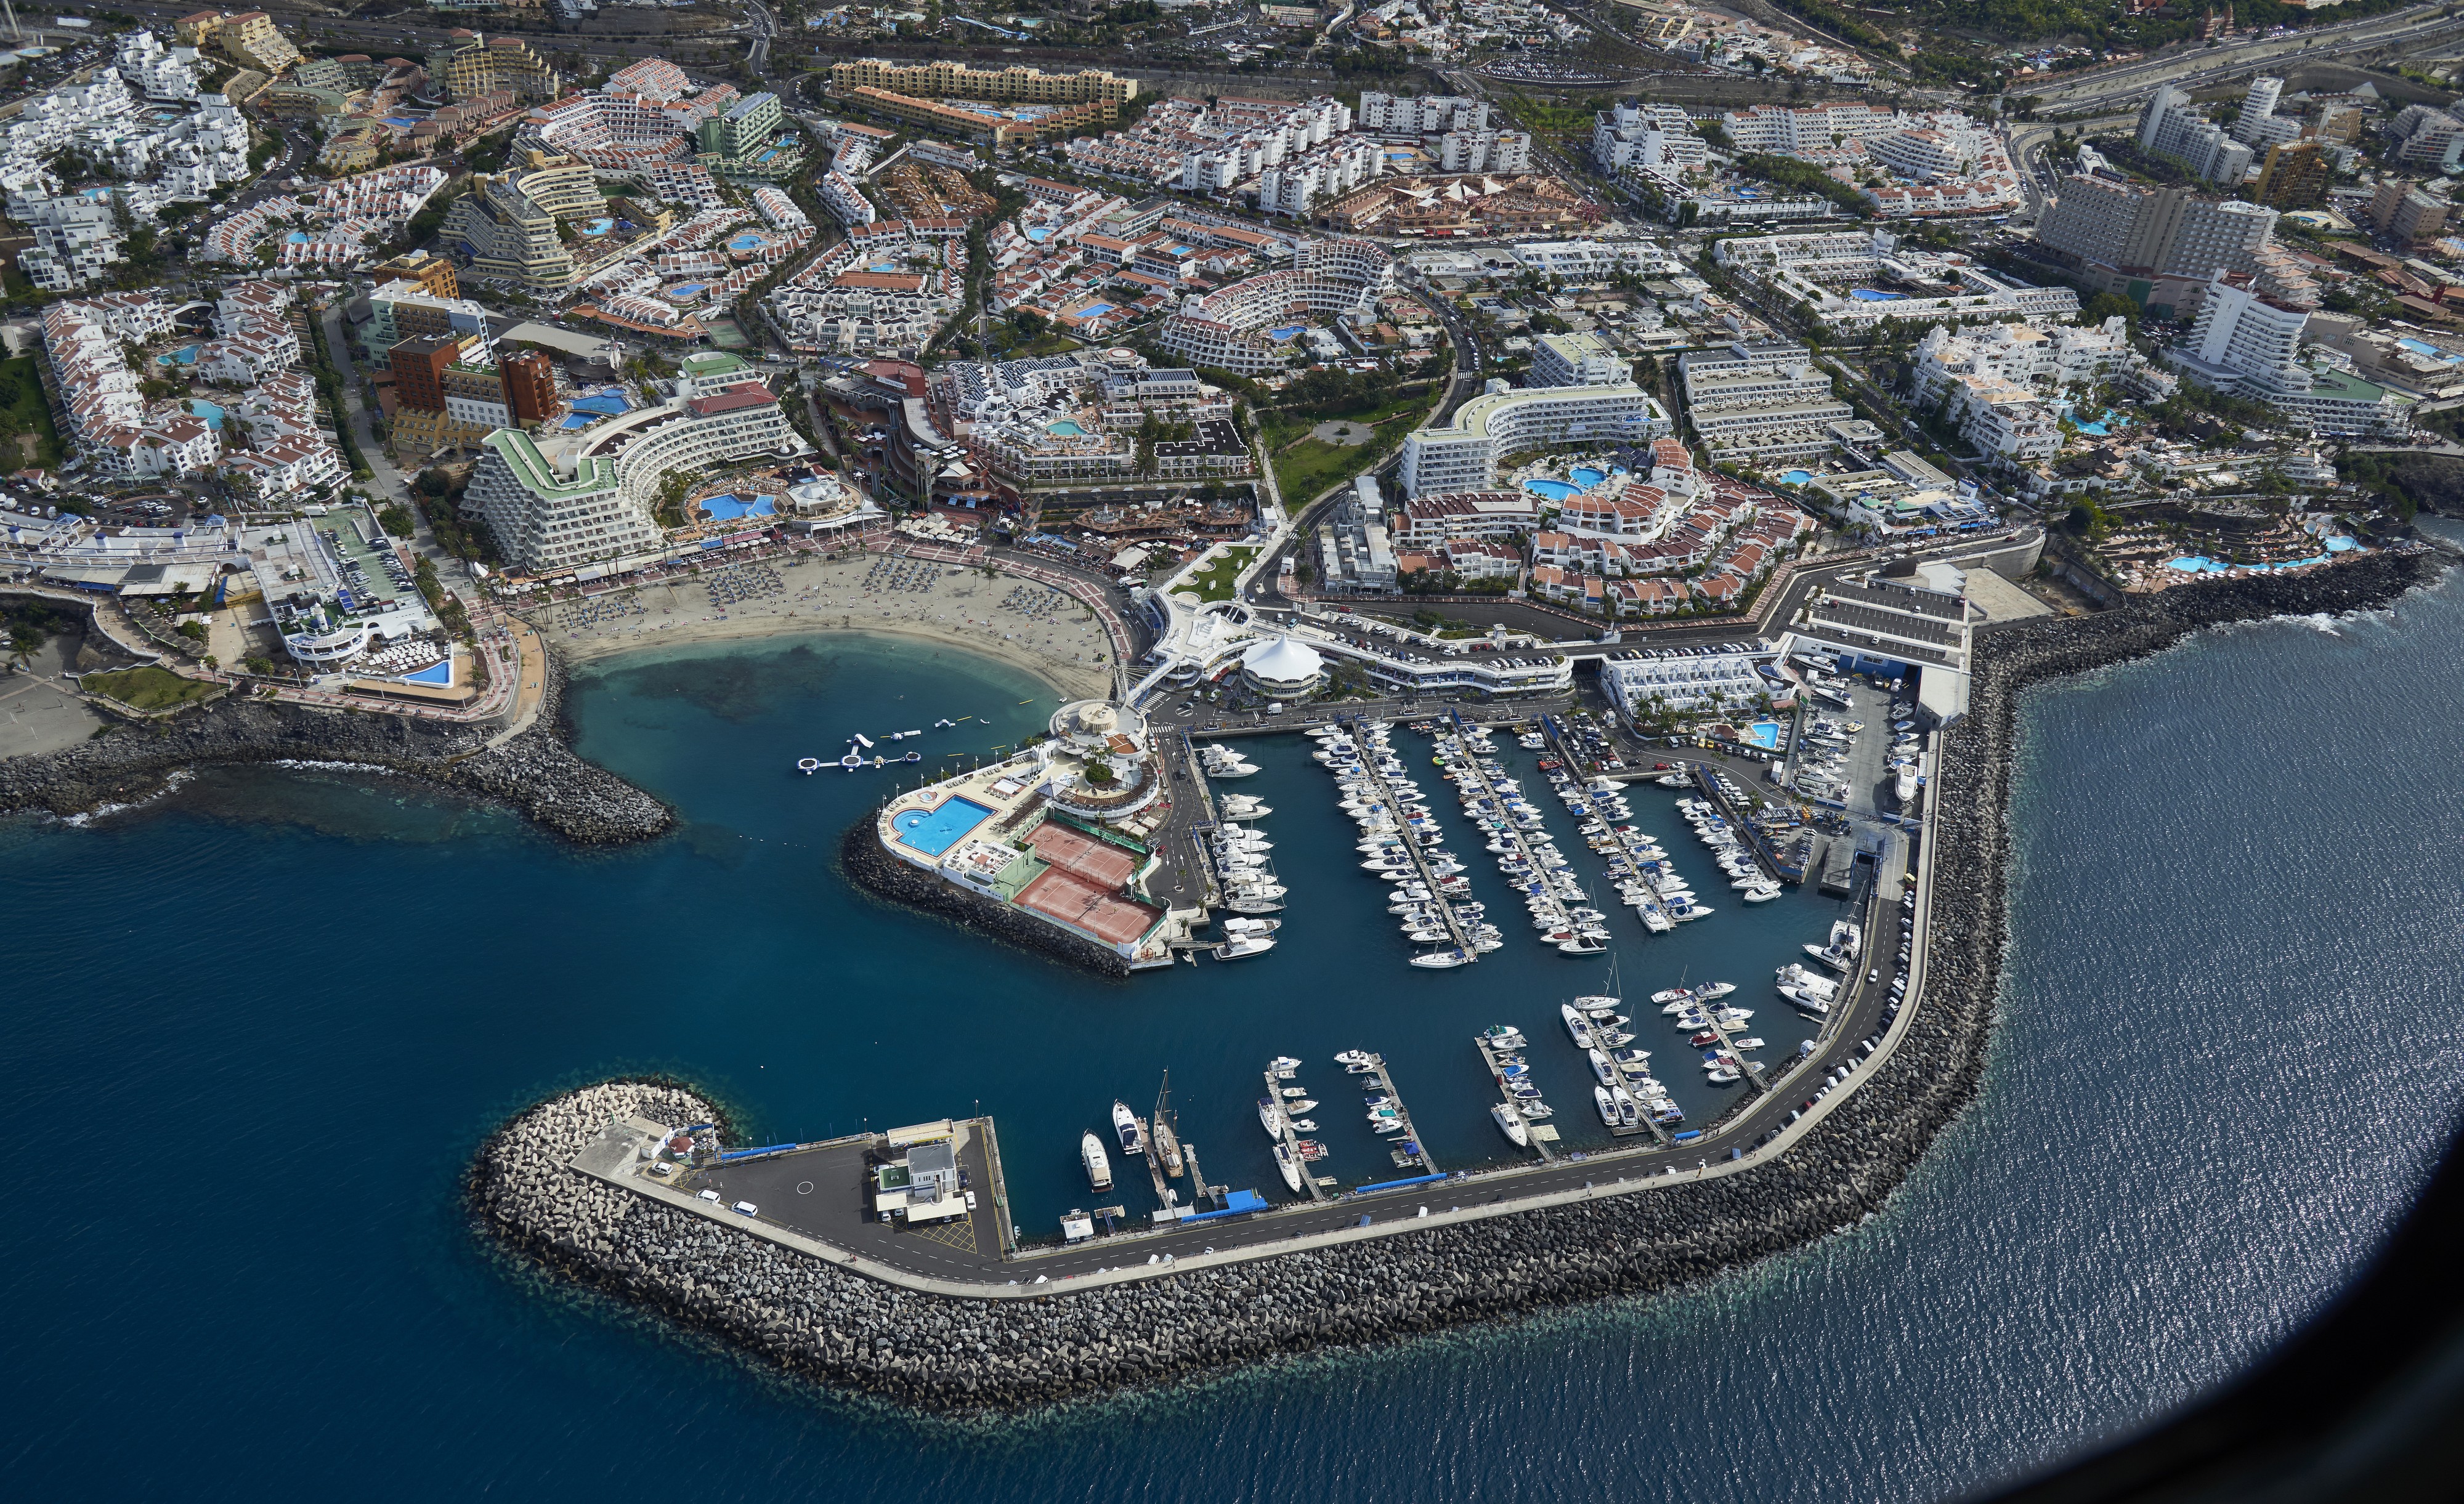 A0432 Tenerife, Adeje and harbour aerial view